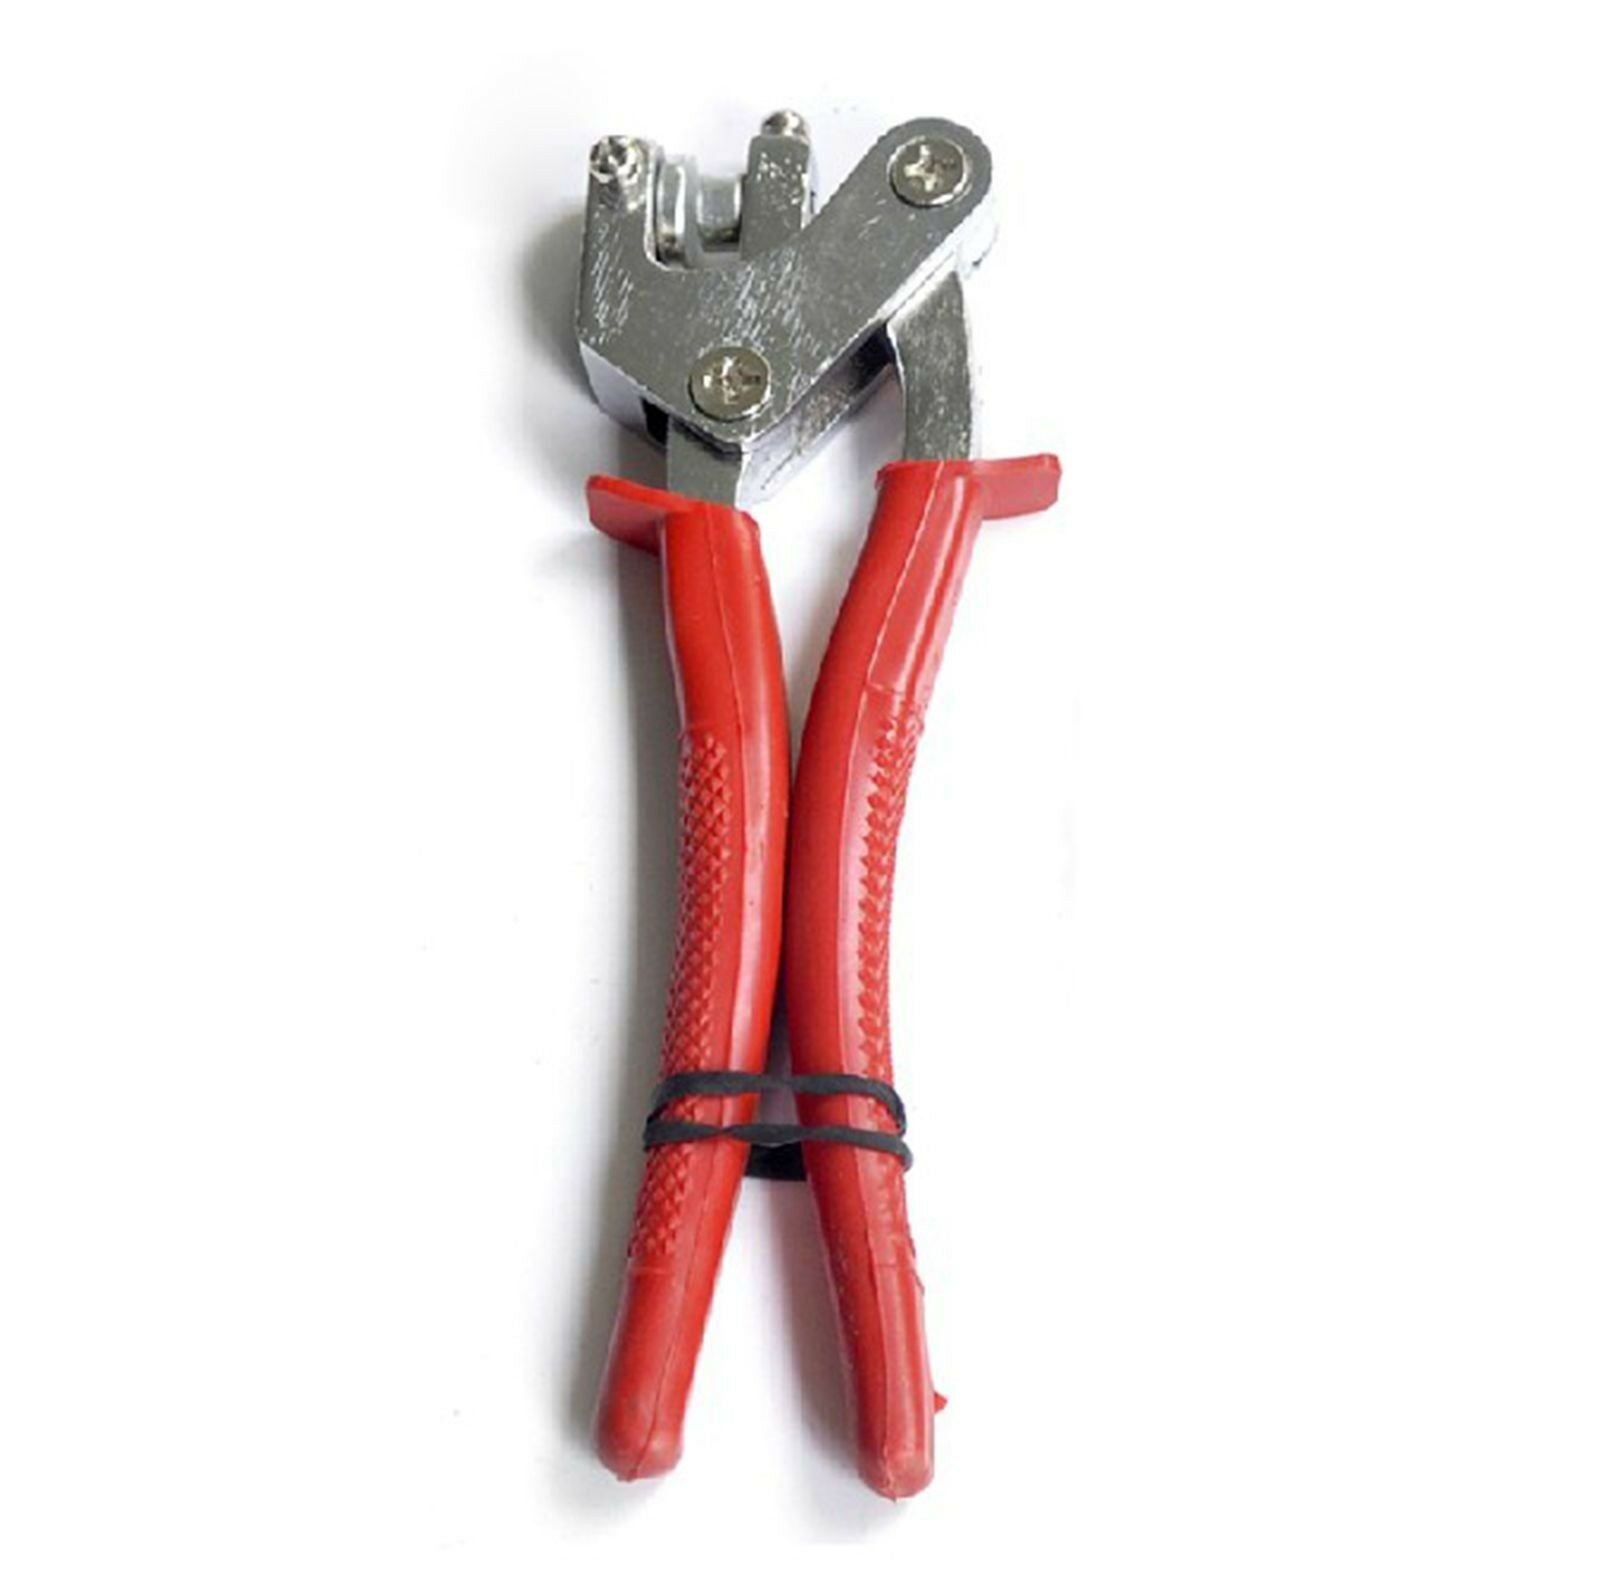 Anti-theft Lead sealing pliers Security Red Plastic Electric Meter/Taxi Meter